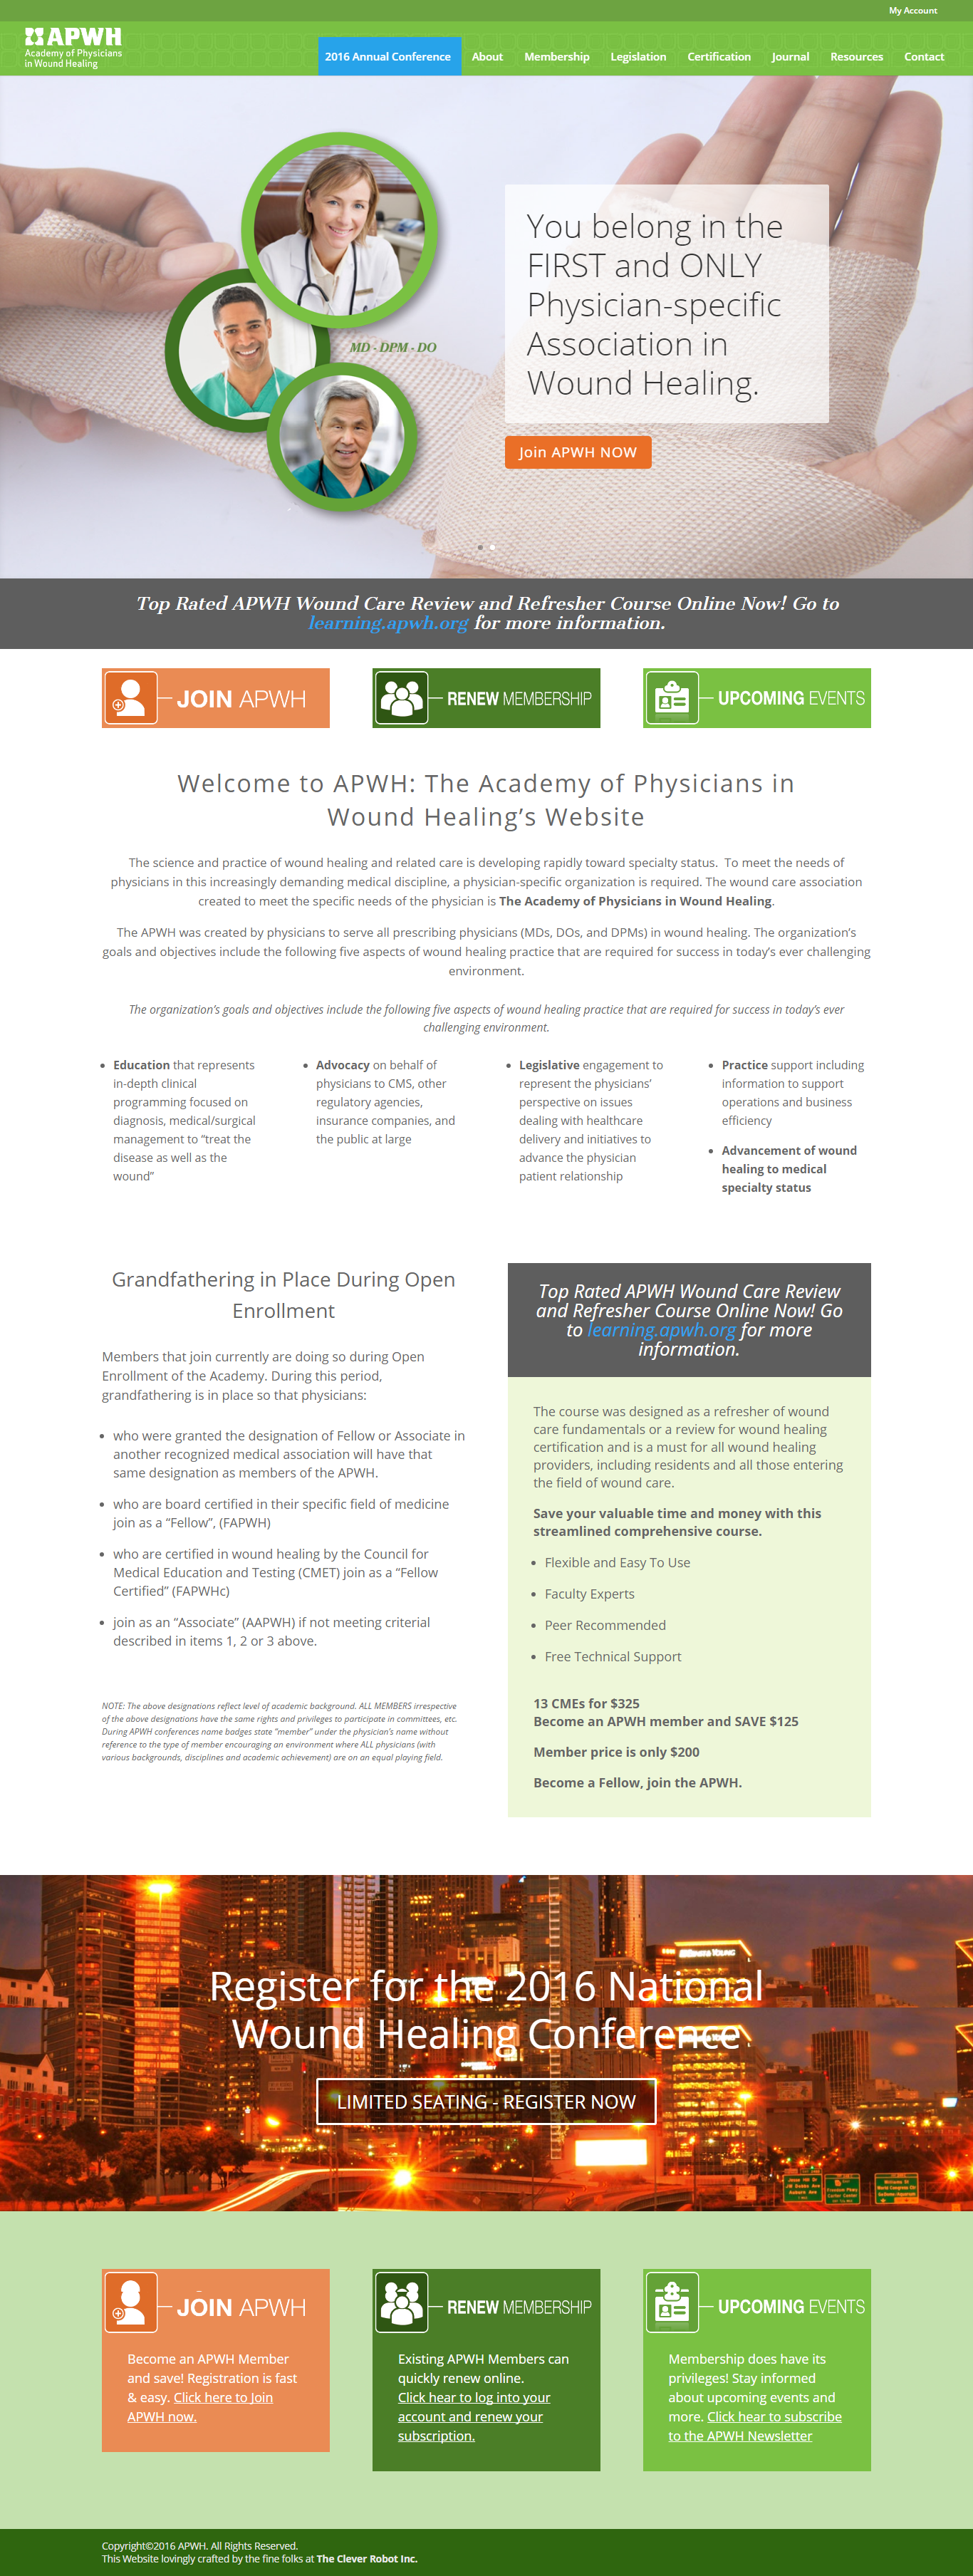 APWH - Academy of Physicians in Wound Healing Website